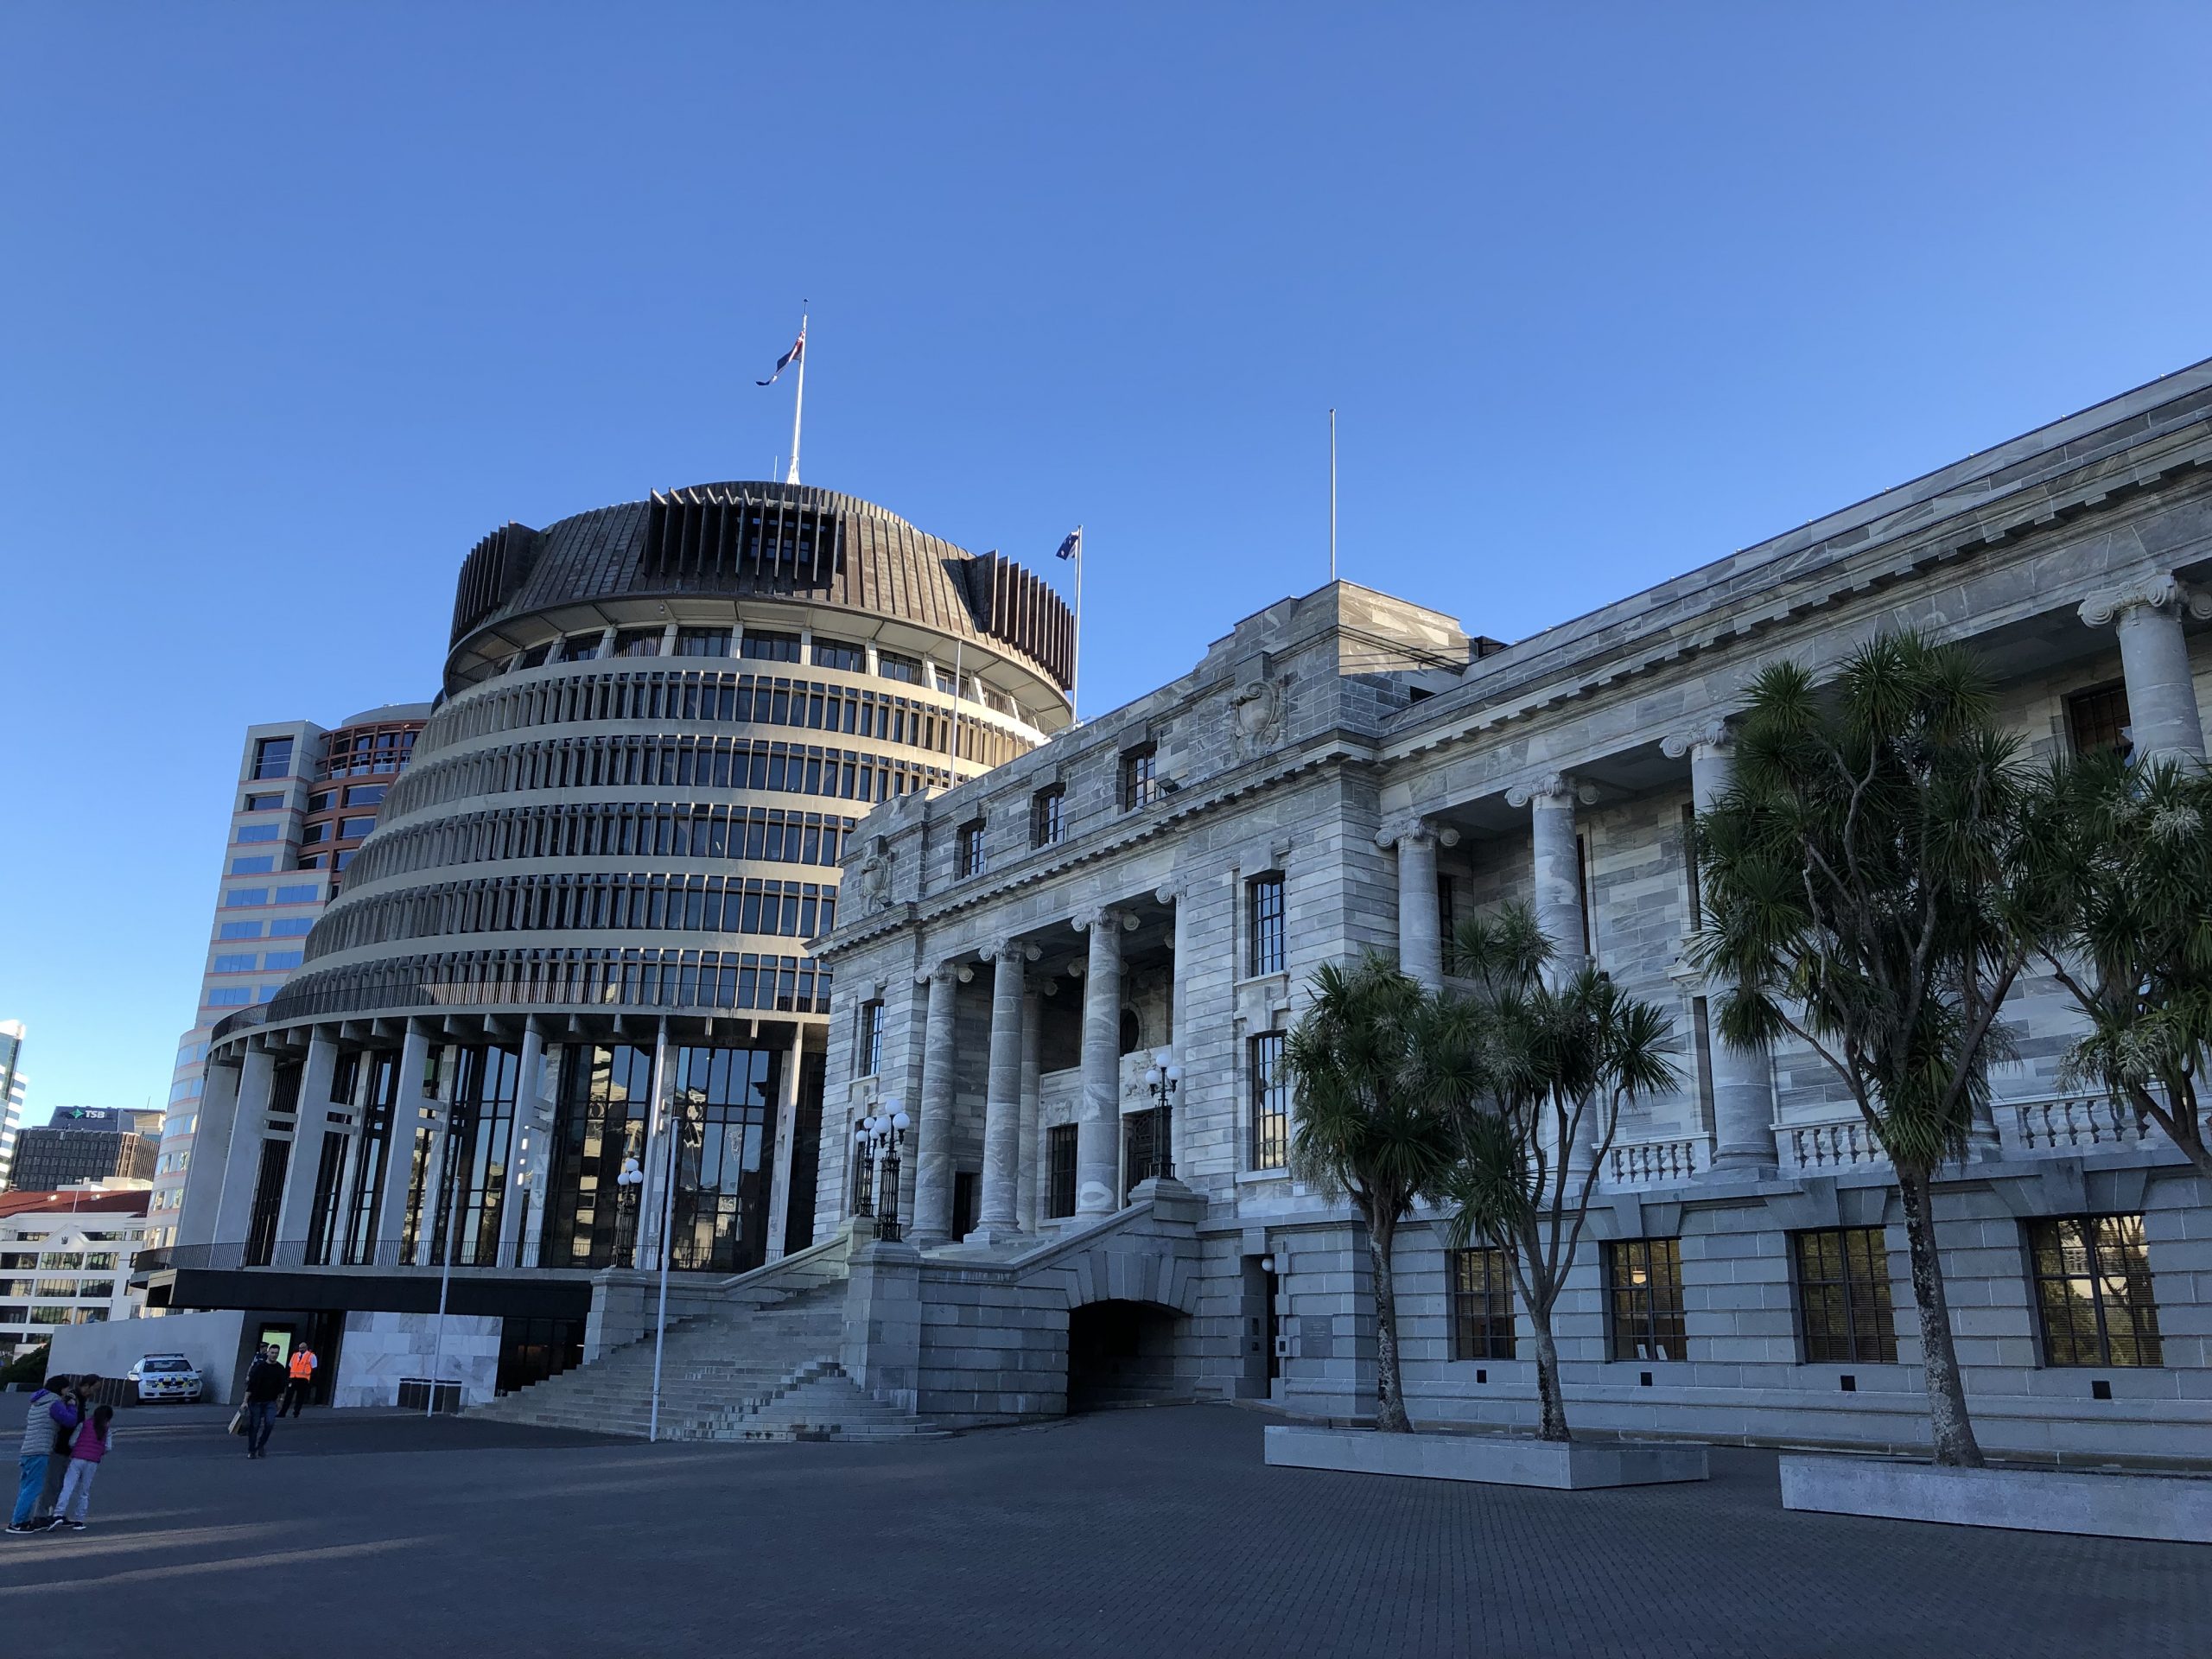 The Beehive, New Zealand's Parliament